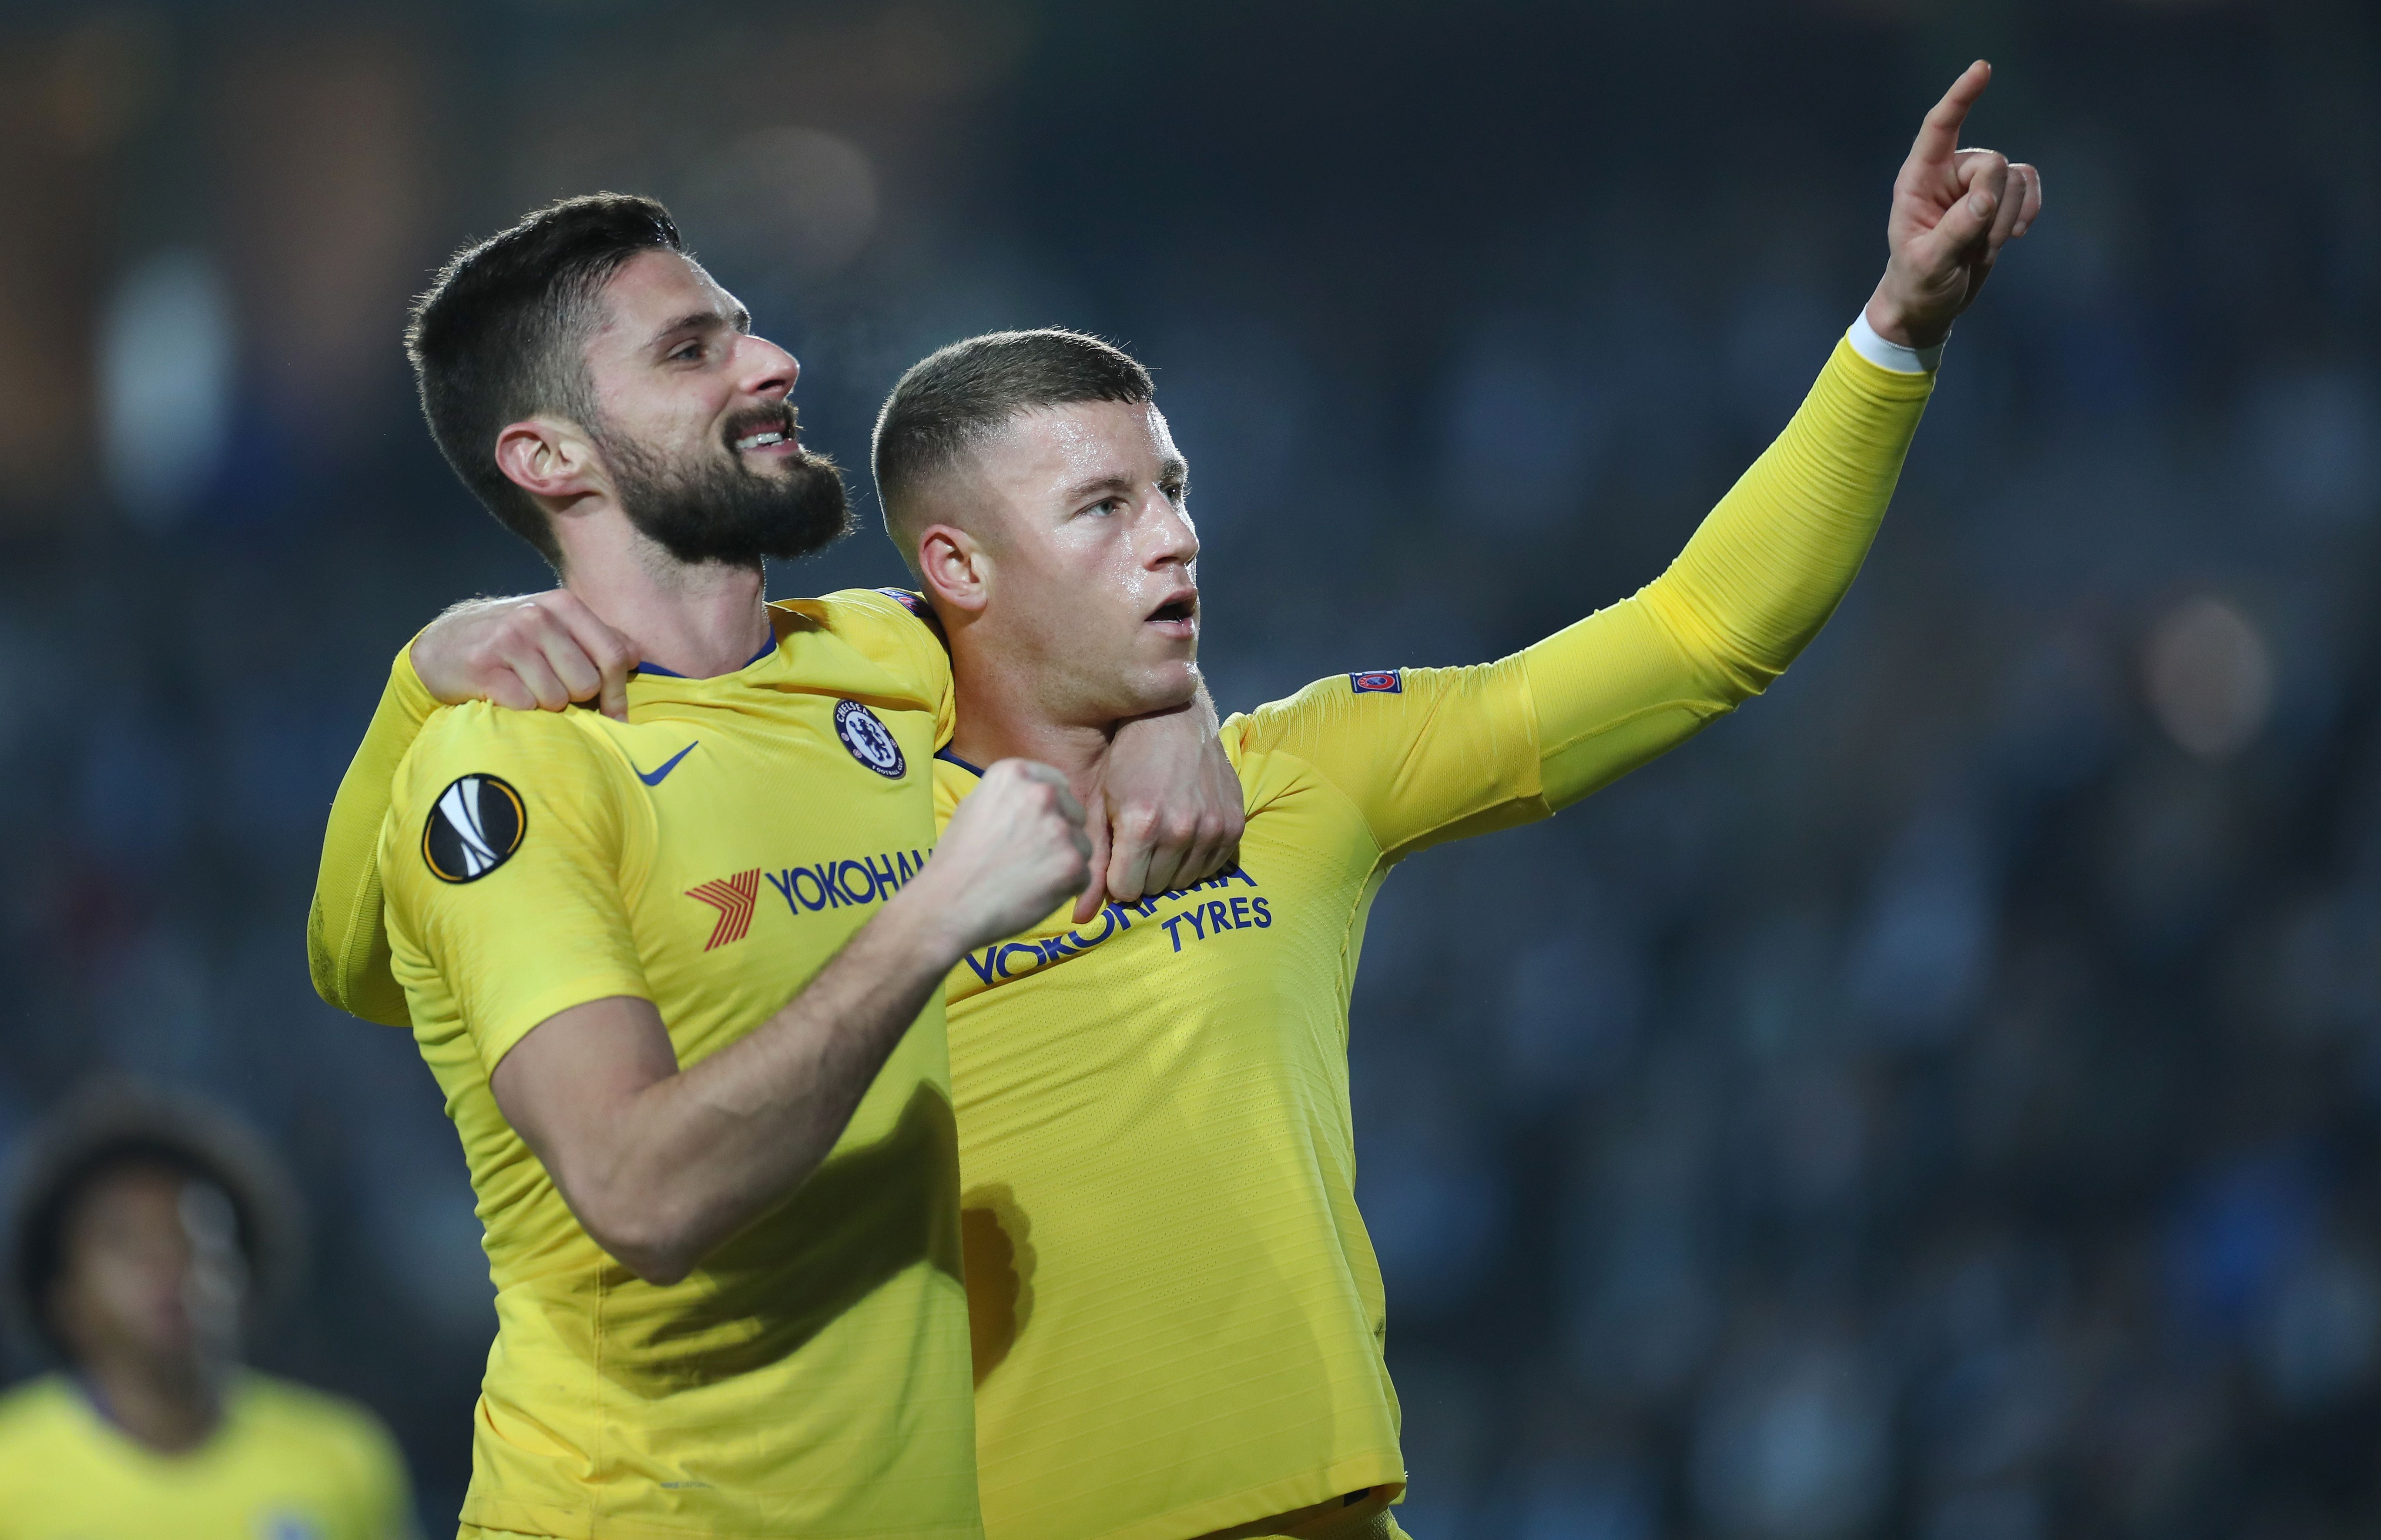 TOPSHOT - Chelsea's English midfielder Ross Barkley (R) celebrates  scoring the 0-1 goal with Chelsea's French striker Olivier Giroud during the UEFA Europa League  round of 32, first-leg football match between Malmo FF and Chelsea in Malmo, Sweden, on February 14, 2019. (Photo by Andreas HILLERGREN / TT NEWS AGENCY / AFP) / Sweden OUT        (Photo credit should read ANDREAS HILLERGREN/AFP/Getty Images)